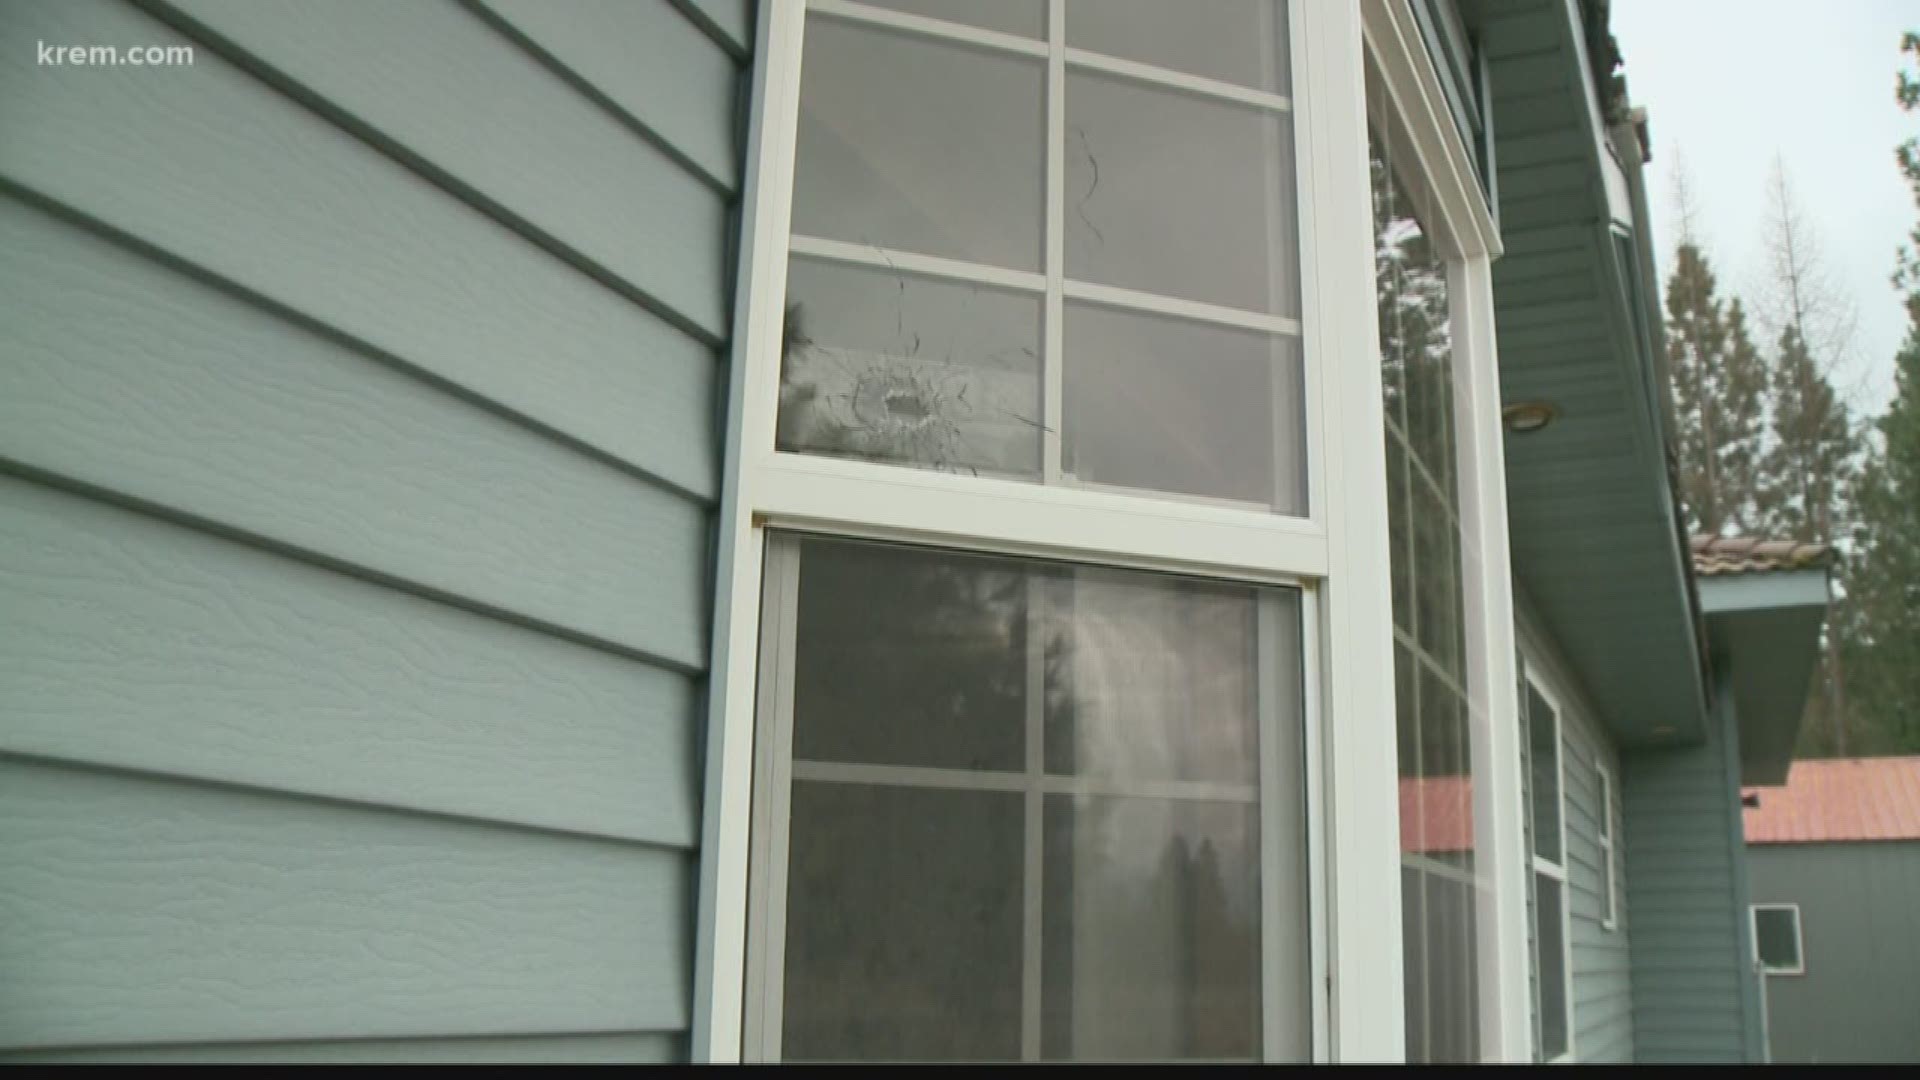 A North Idaho man was talking on the phone at his home when a stray bullet went right through his window.